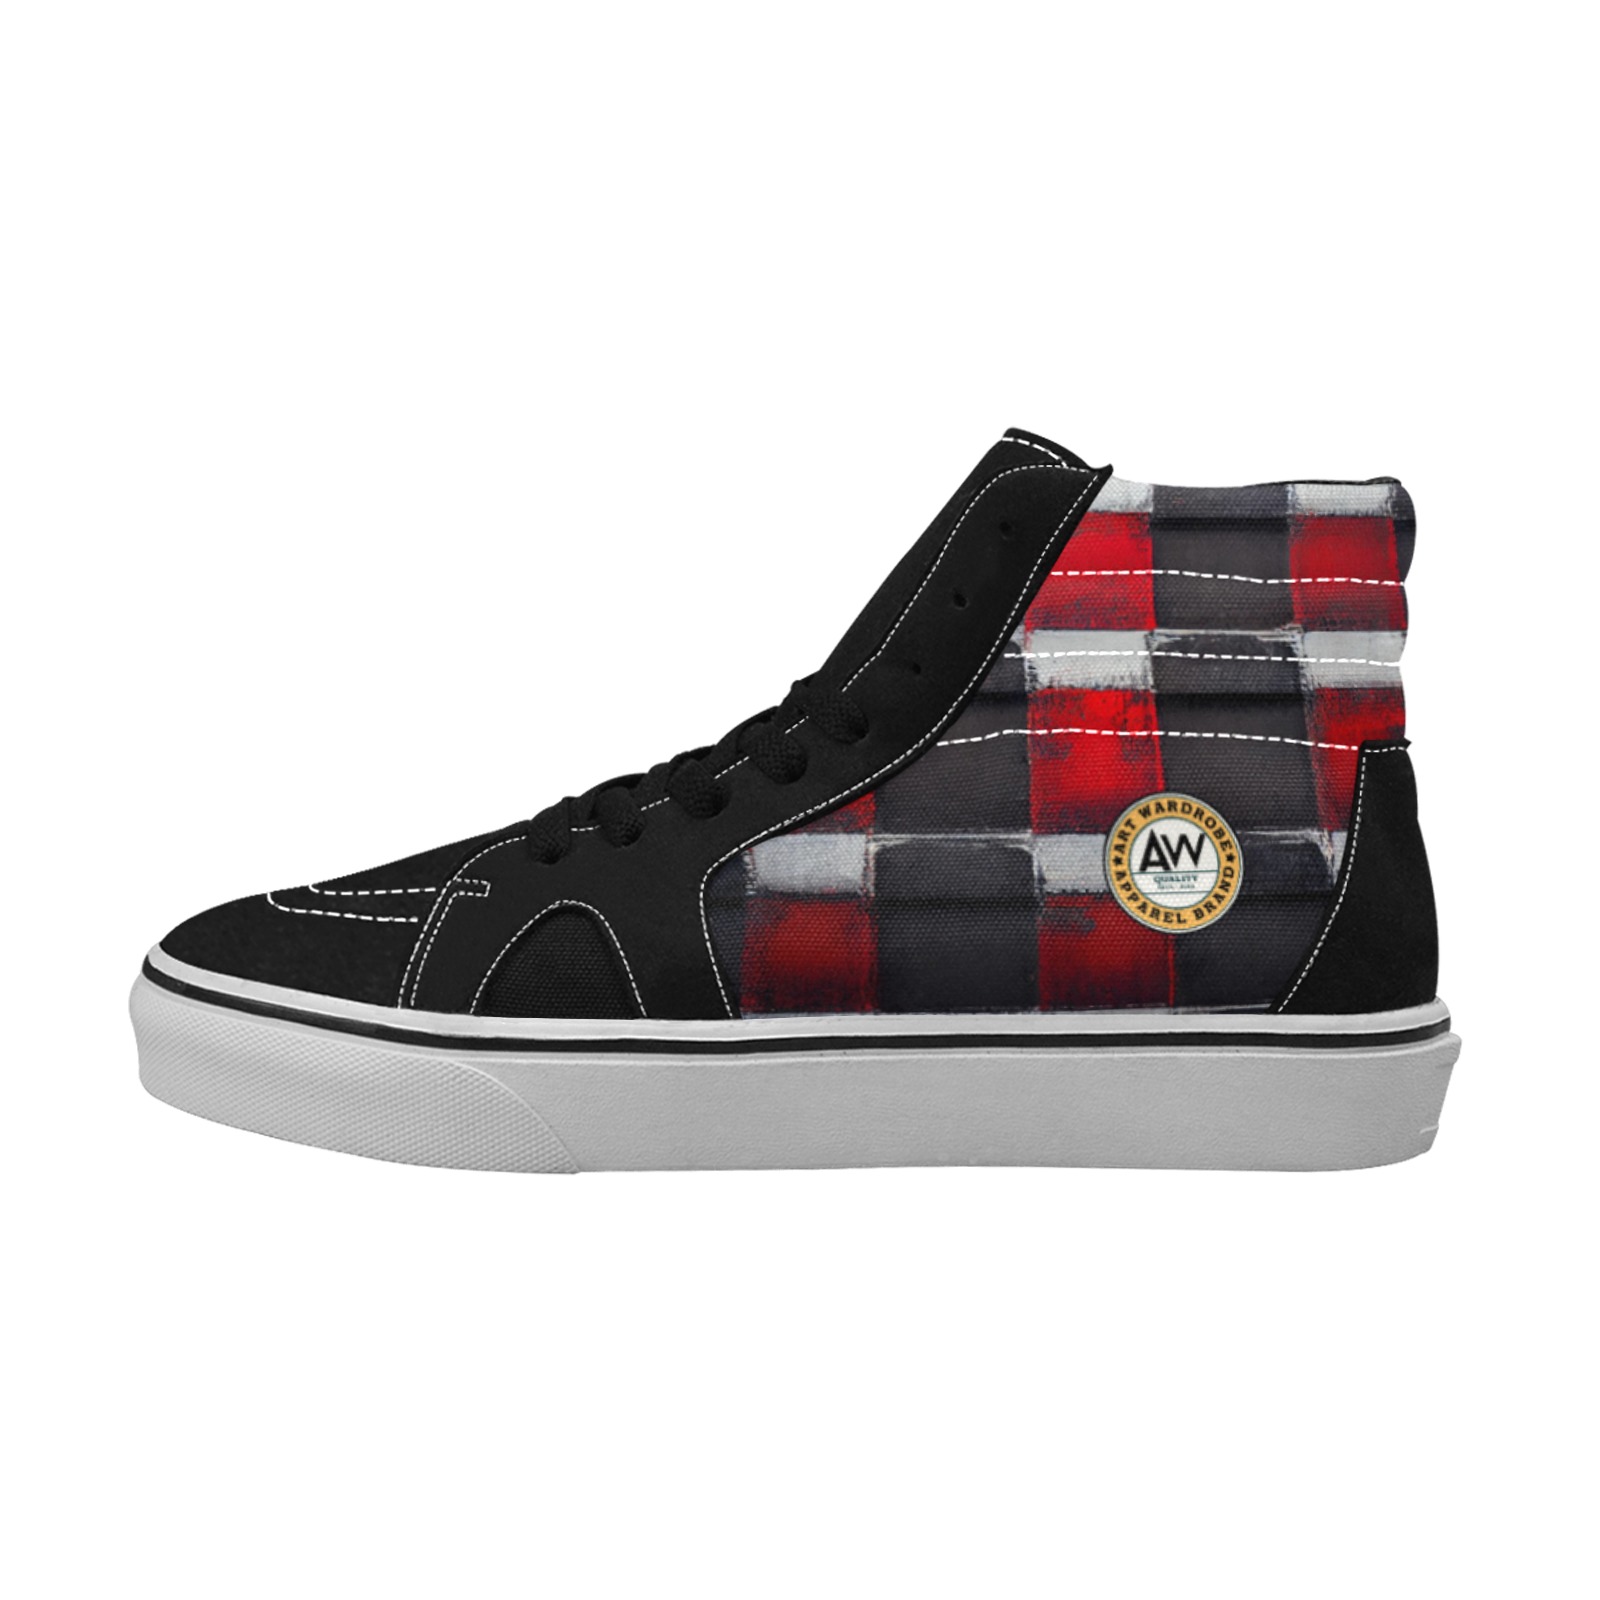 red, white and black checked Men's High Top Skateboarding Shoes (Model E001-1)